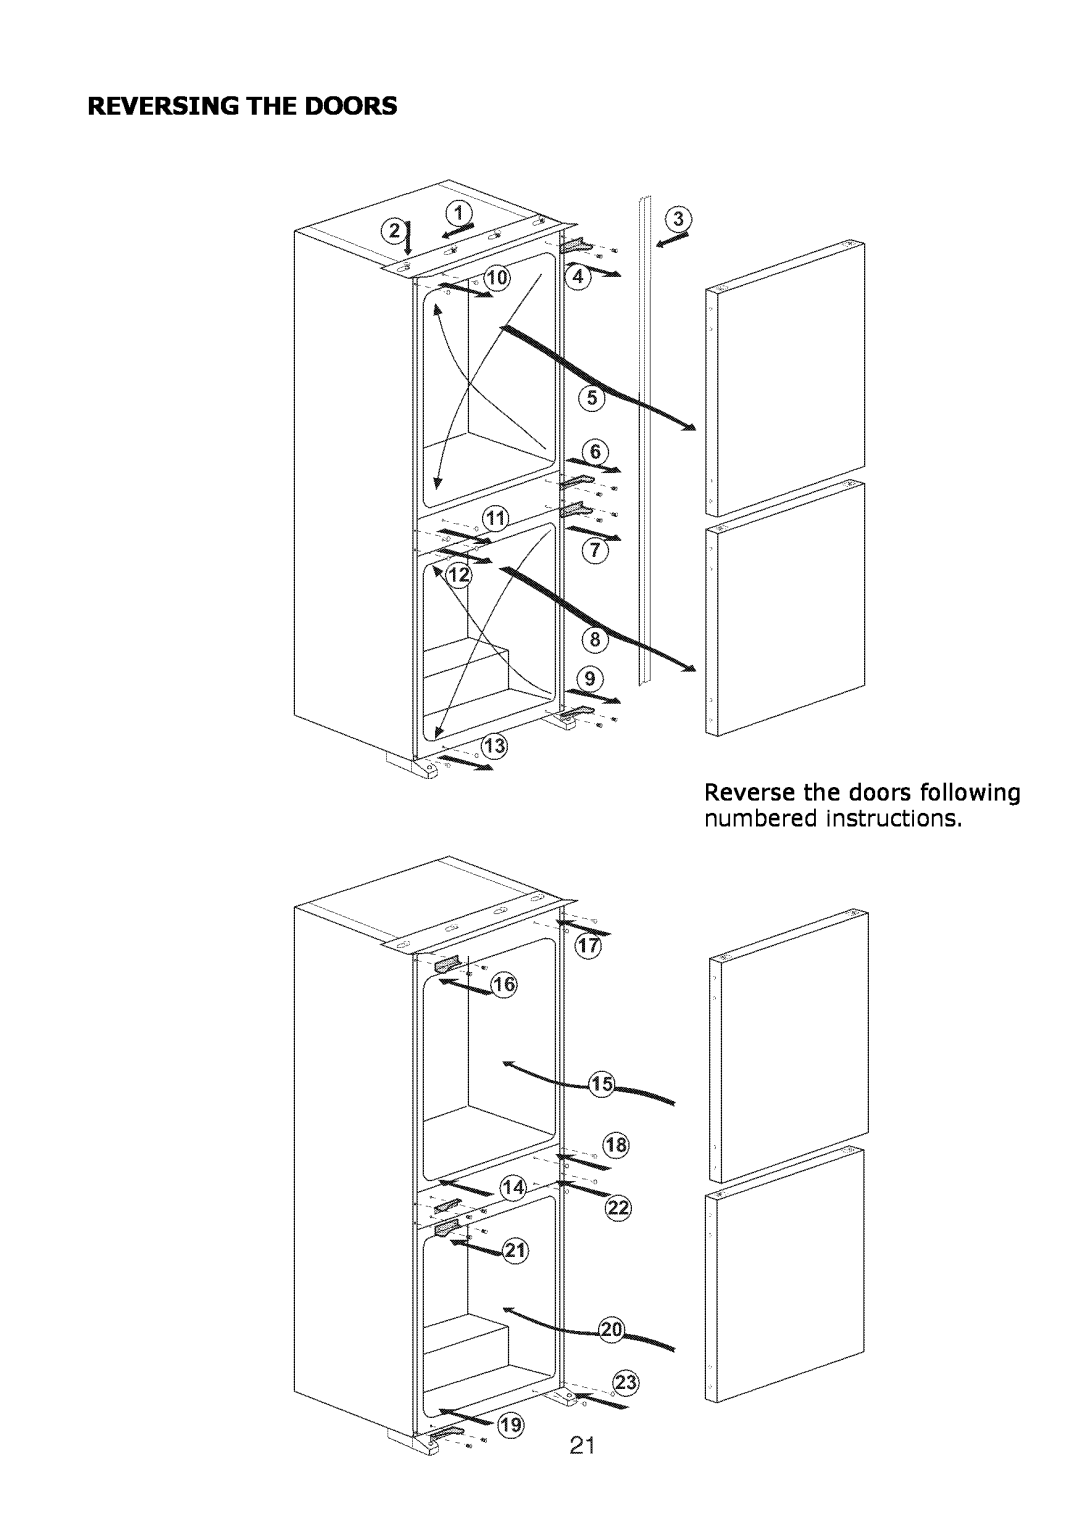 Glen Dimplex Home Appliances Ltd BE815 manual Reversing The Doors, Reverse the doors following numbered instructions 